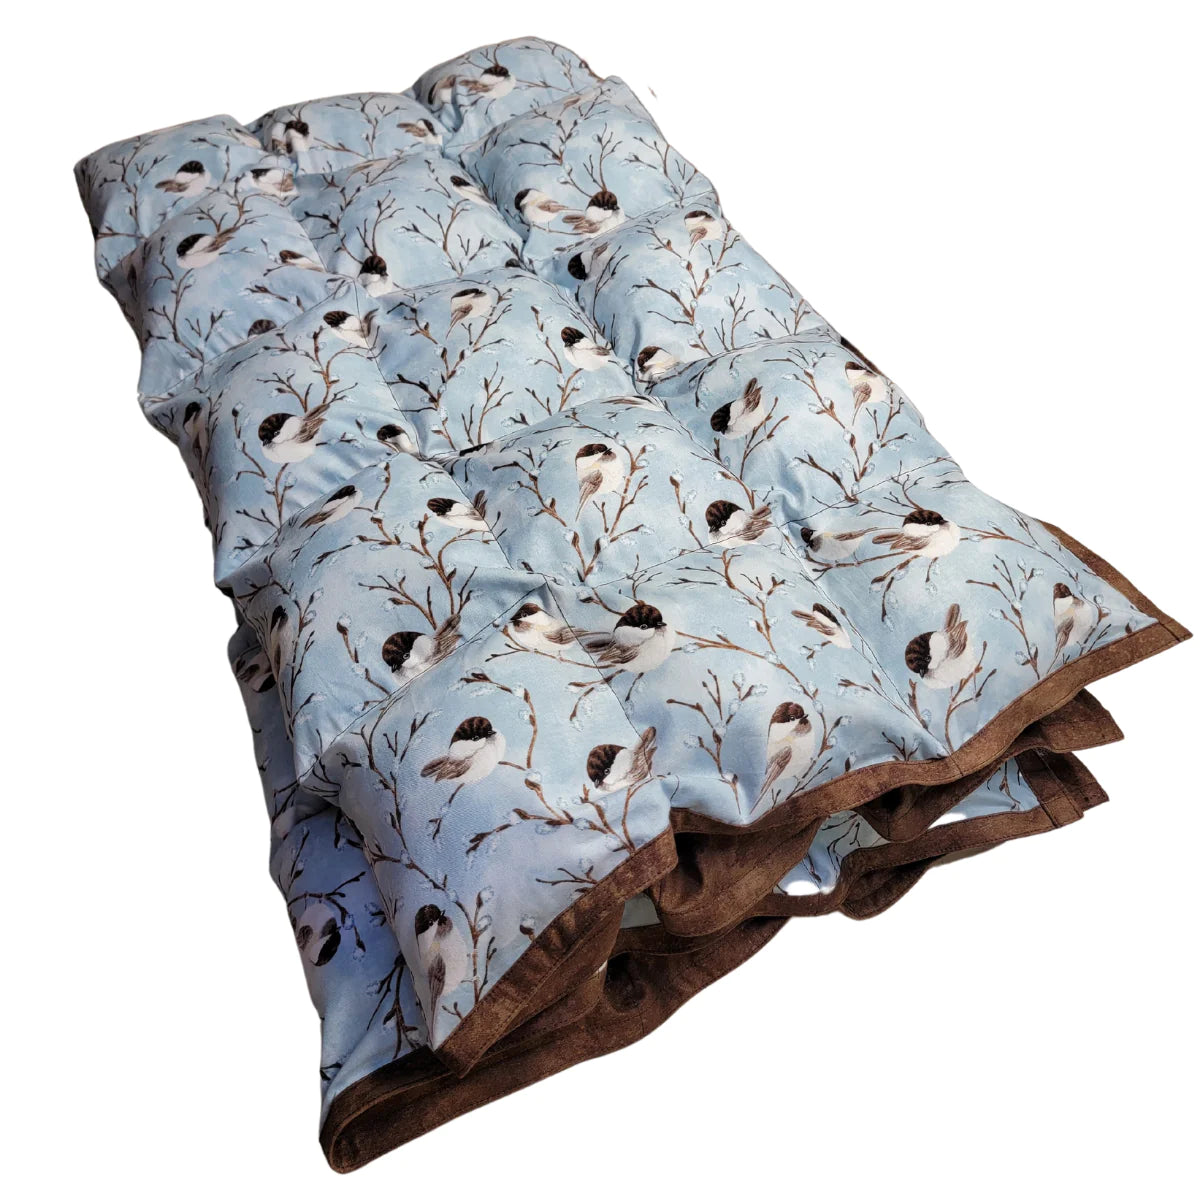 Clearance Weighted Blanket - Medium 12 lb Birds and Branches (for 100 lb user)